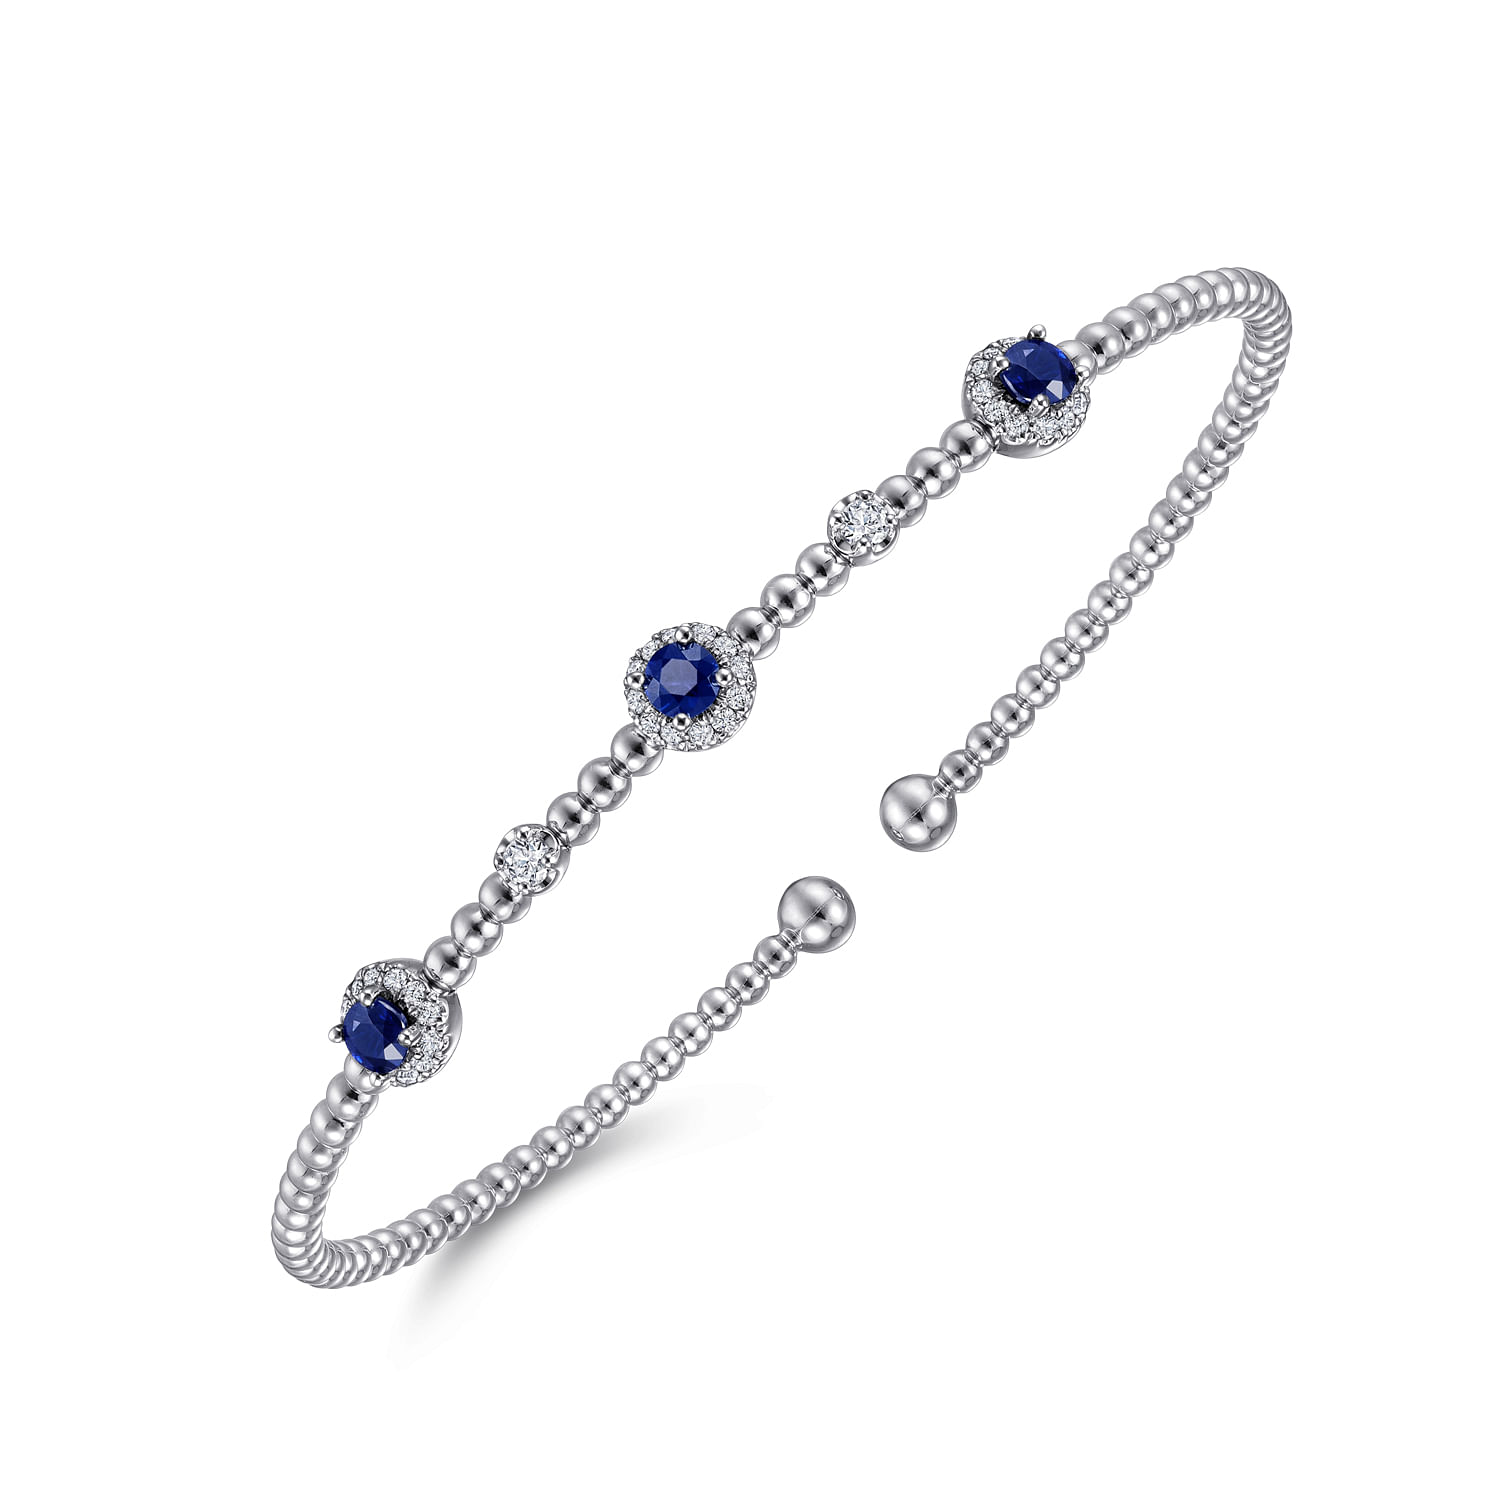 14K White Gold Bujukan Bead Cuff Bracelet with Sapphire and Diamond Halo Stations